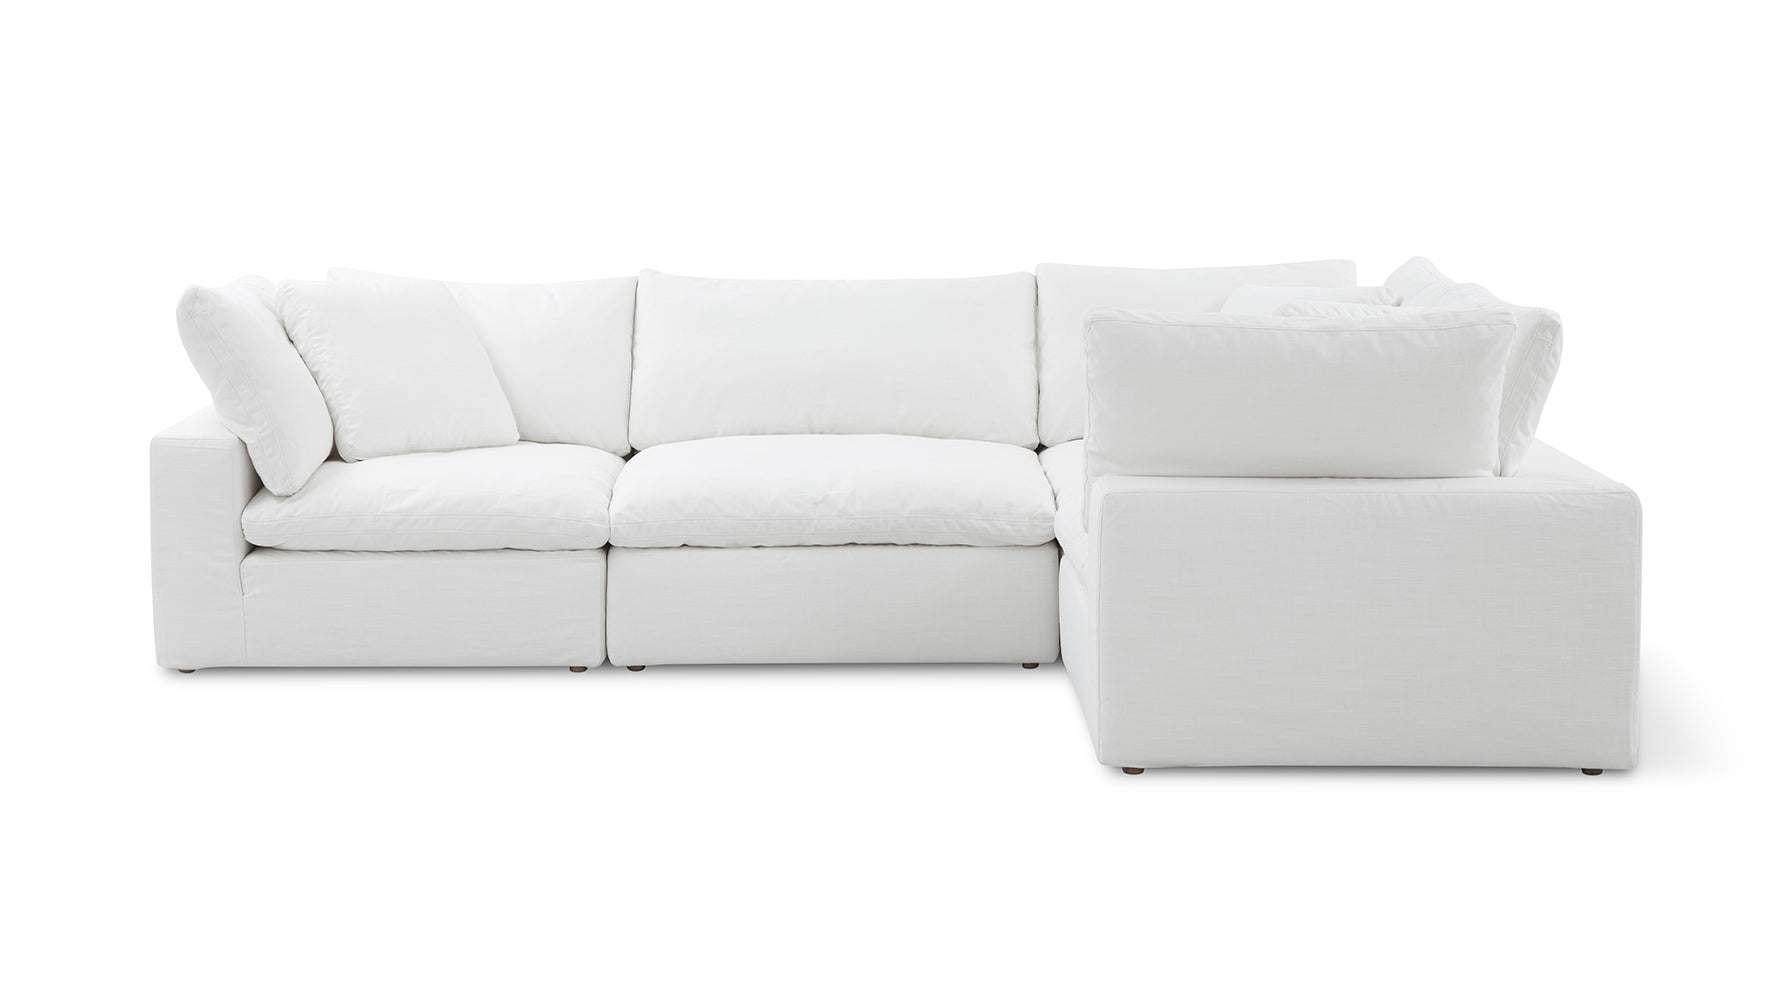 Movie Night™ 4-Piece Modular Sectional Closed, Large, Brie - Image 1